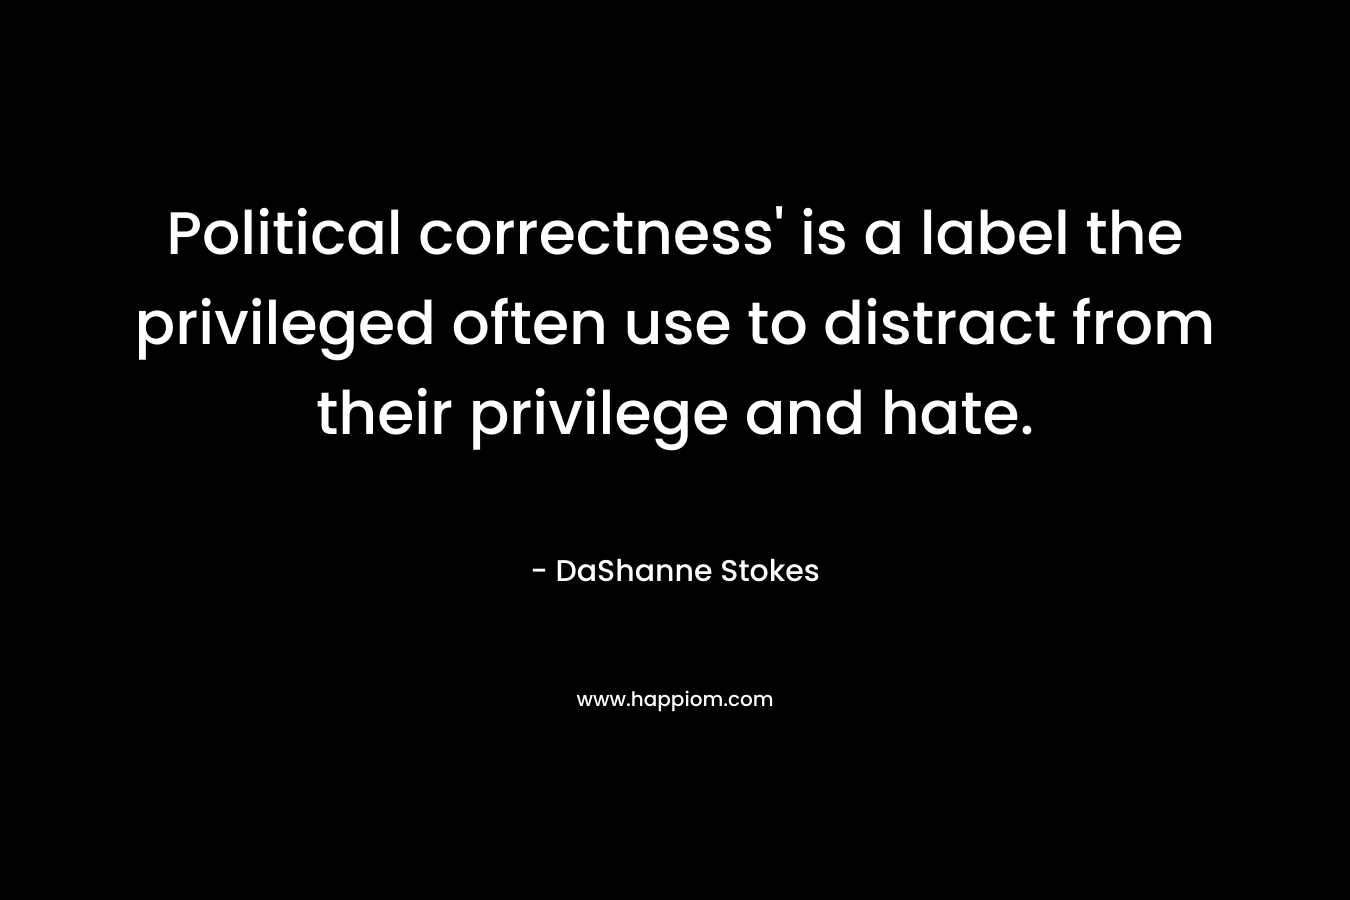 Political correctness' is a label the privileged often use to distract from their privilege and hate.